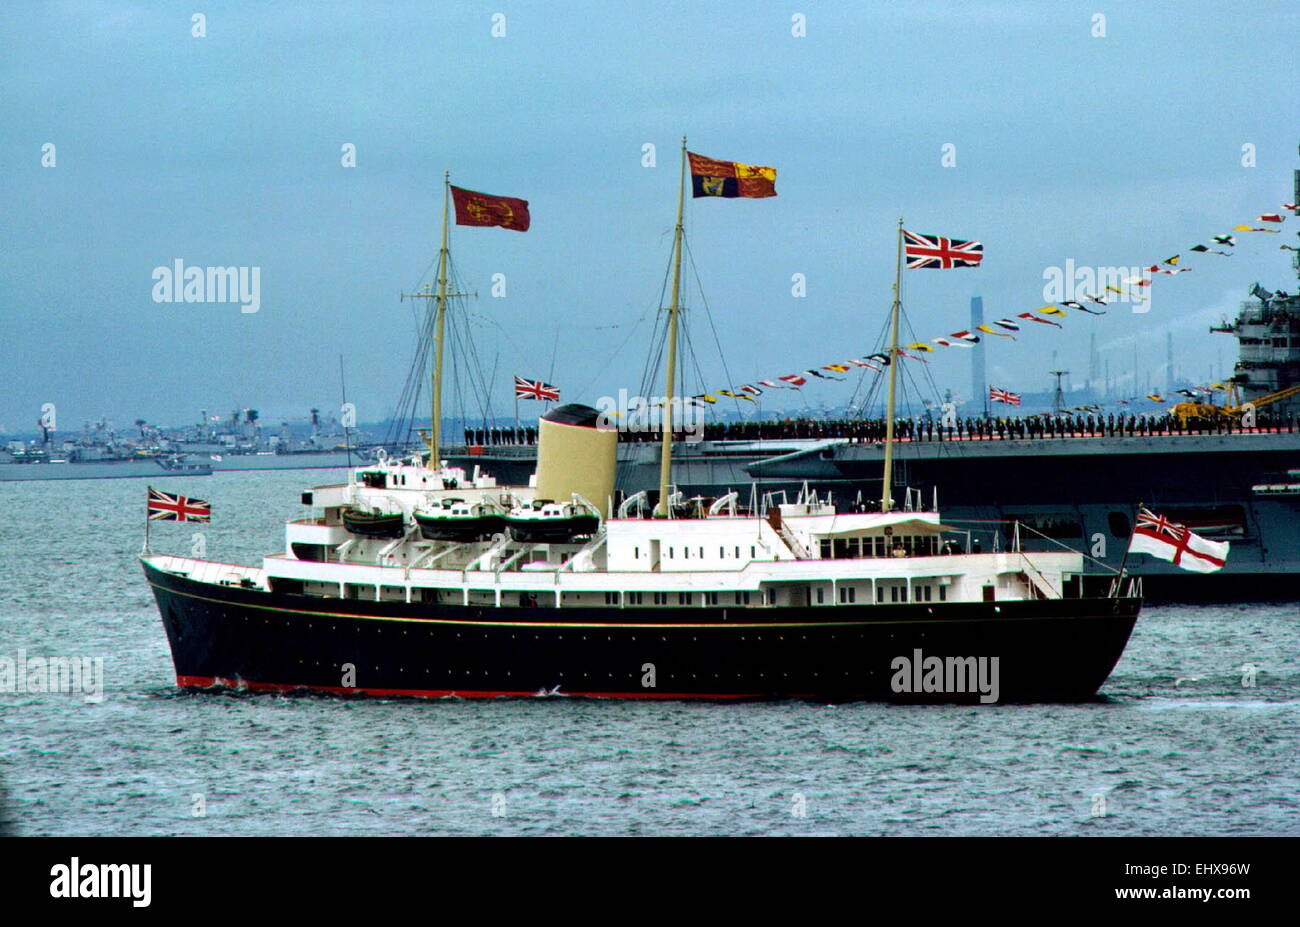 AJAX NEWS PHOTOS. 1977. SPITHEAD, ENGLAND. - ROYAL YACHT - THE ROYAL YACHT BRITANNIA WITH H.M.QUEEN ELIZABETH II EMBARKED, SAILS PAST THE AIRCRAFT CARRIER HMS ARK ROYAL DURING THE 1977 SILVER JUBILEE FLEET REVIEW.  PHOTO:JONATHAN EASTLAND/AJAX REF:SJ FLEET 1977 Stock Photo